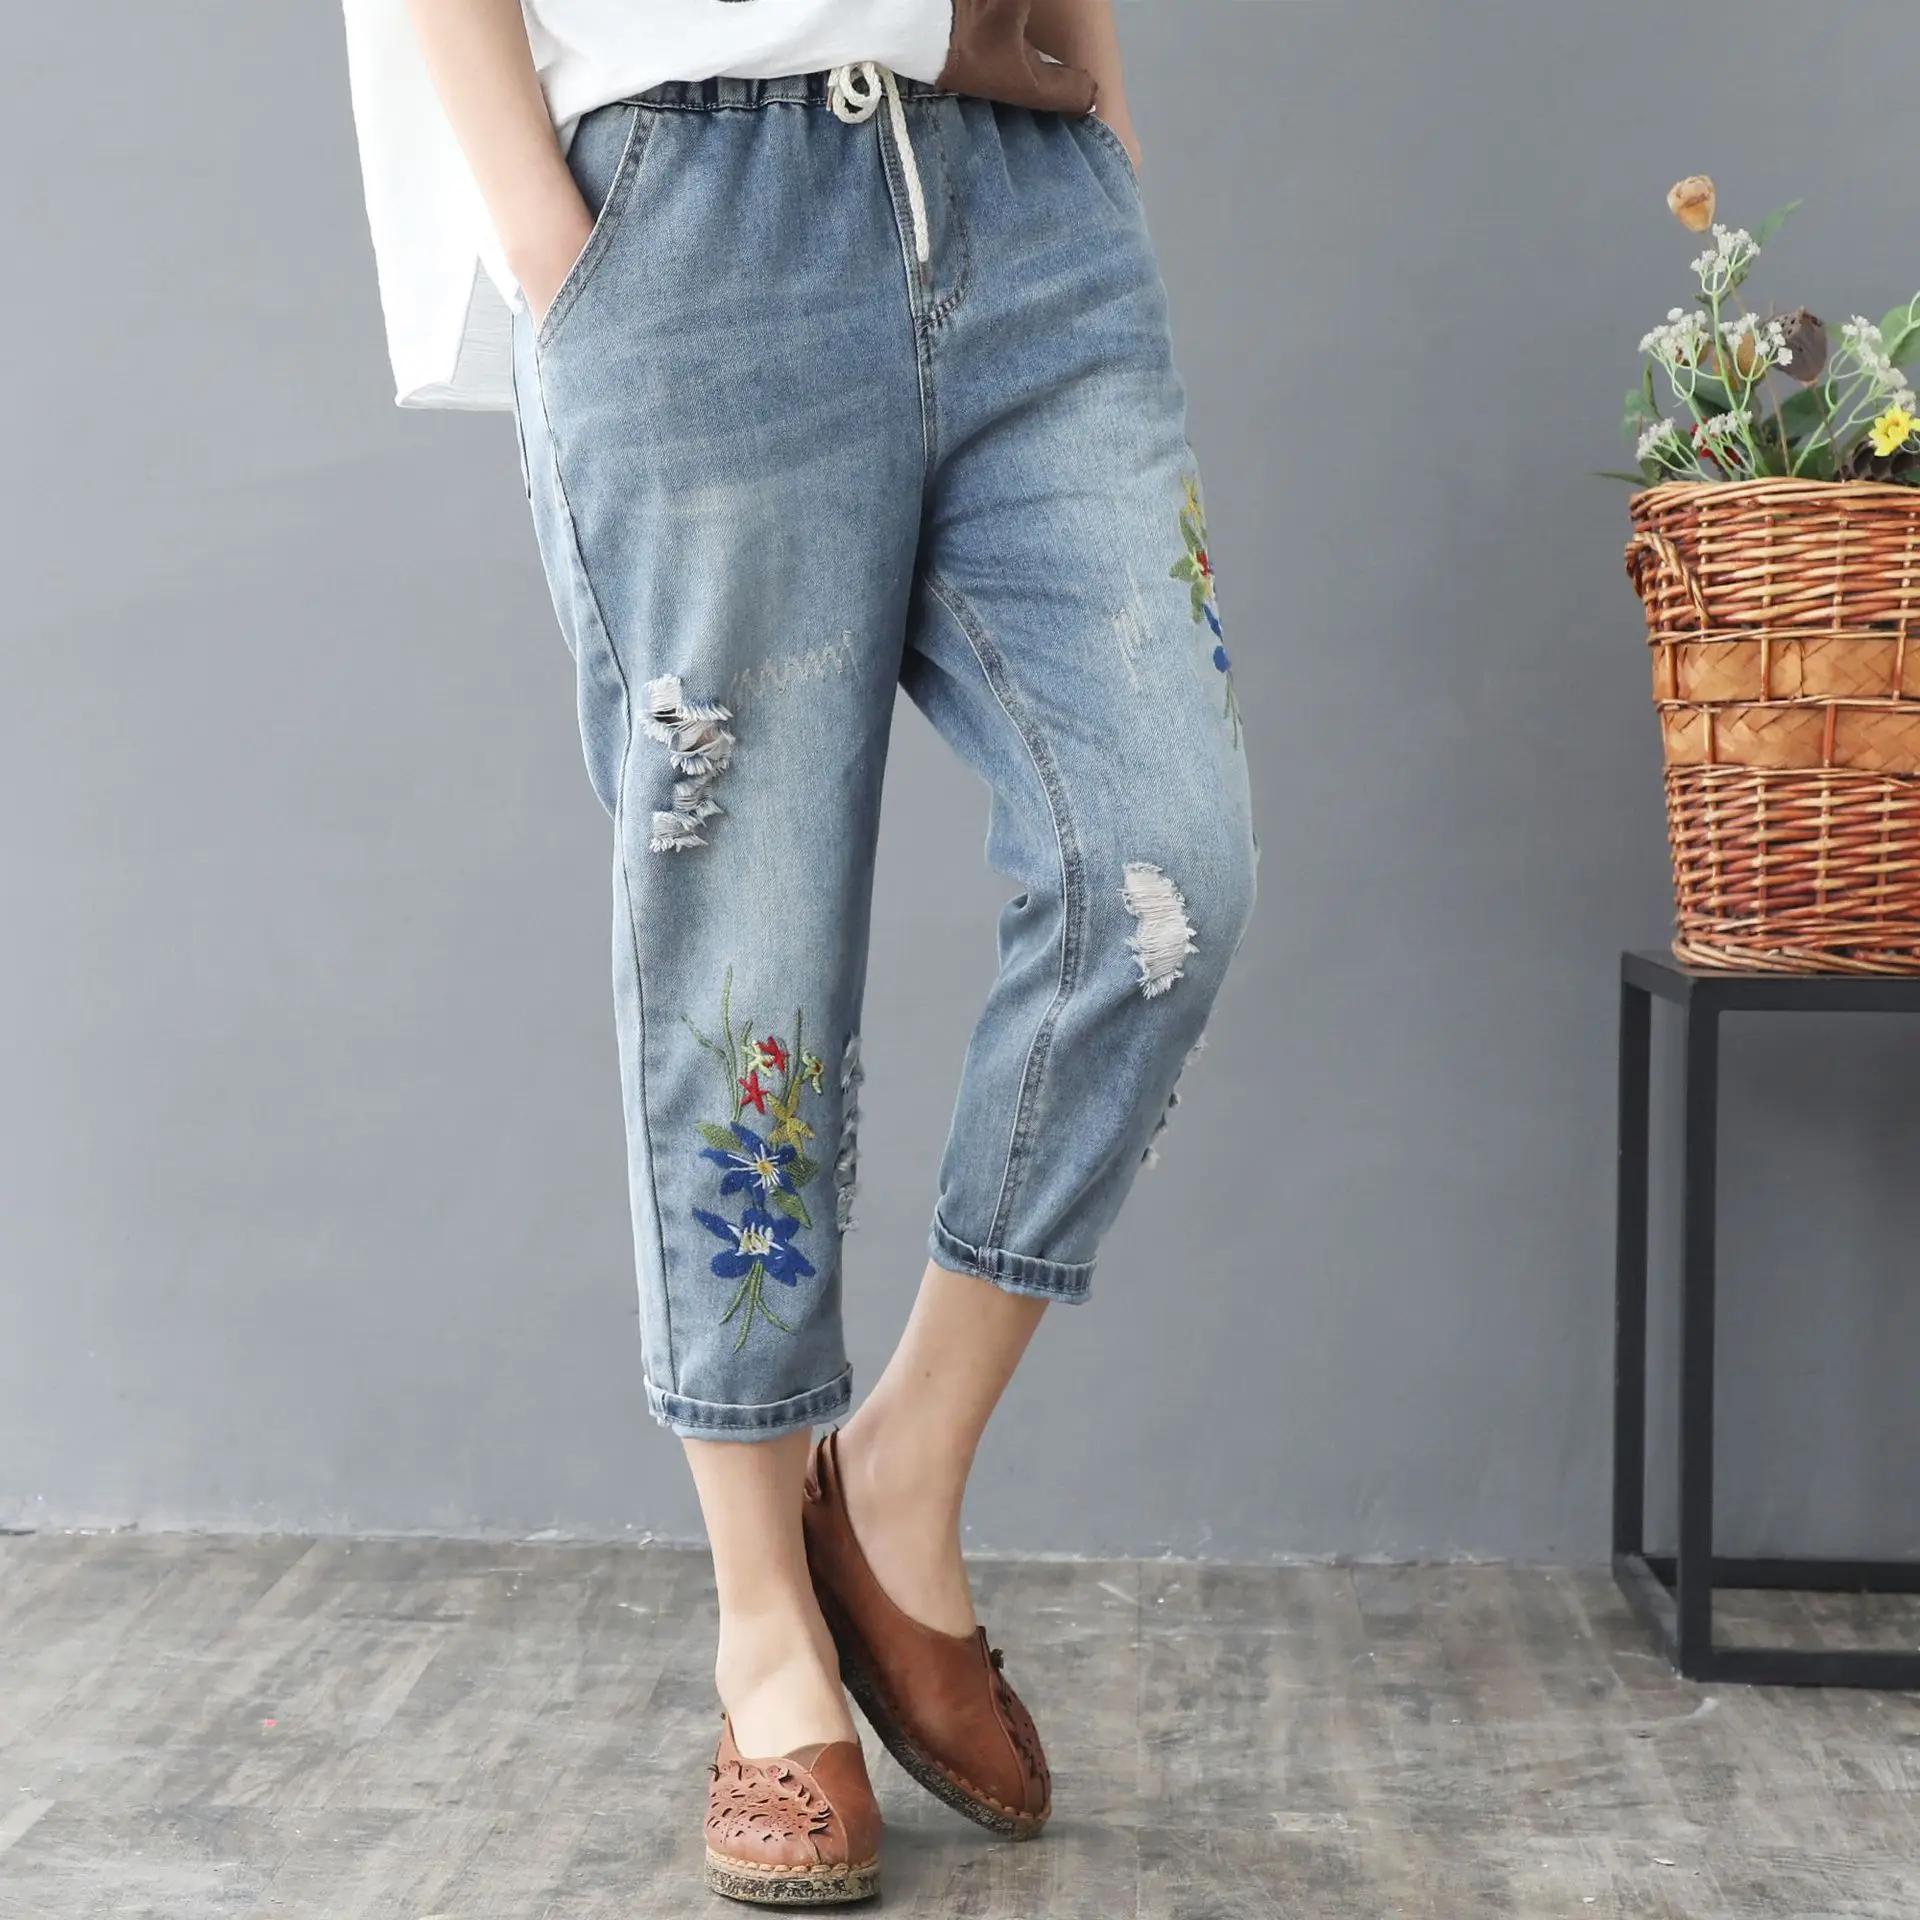 ripped jeans Elastic Waist Jeans Ladies Vintage Embroidery Trousers Women Casual Retro Floral Denim Cowboy Ripped Harem Pants Yalabovso jeans pant Jeans